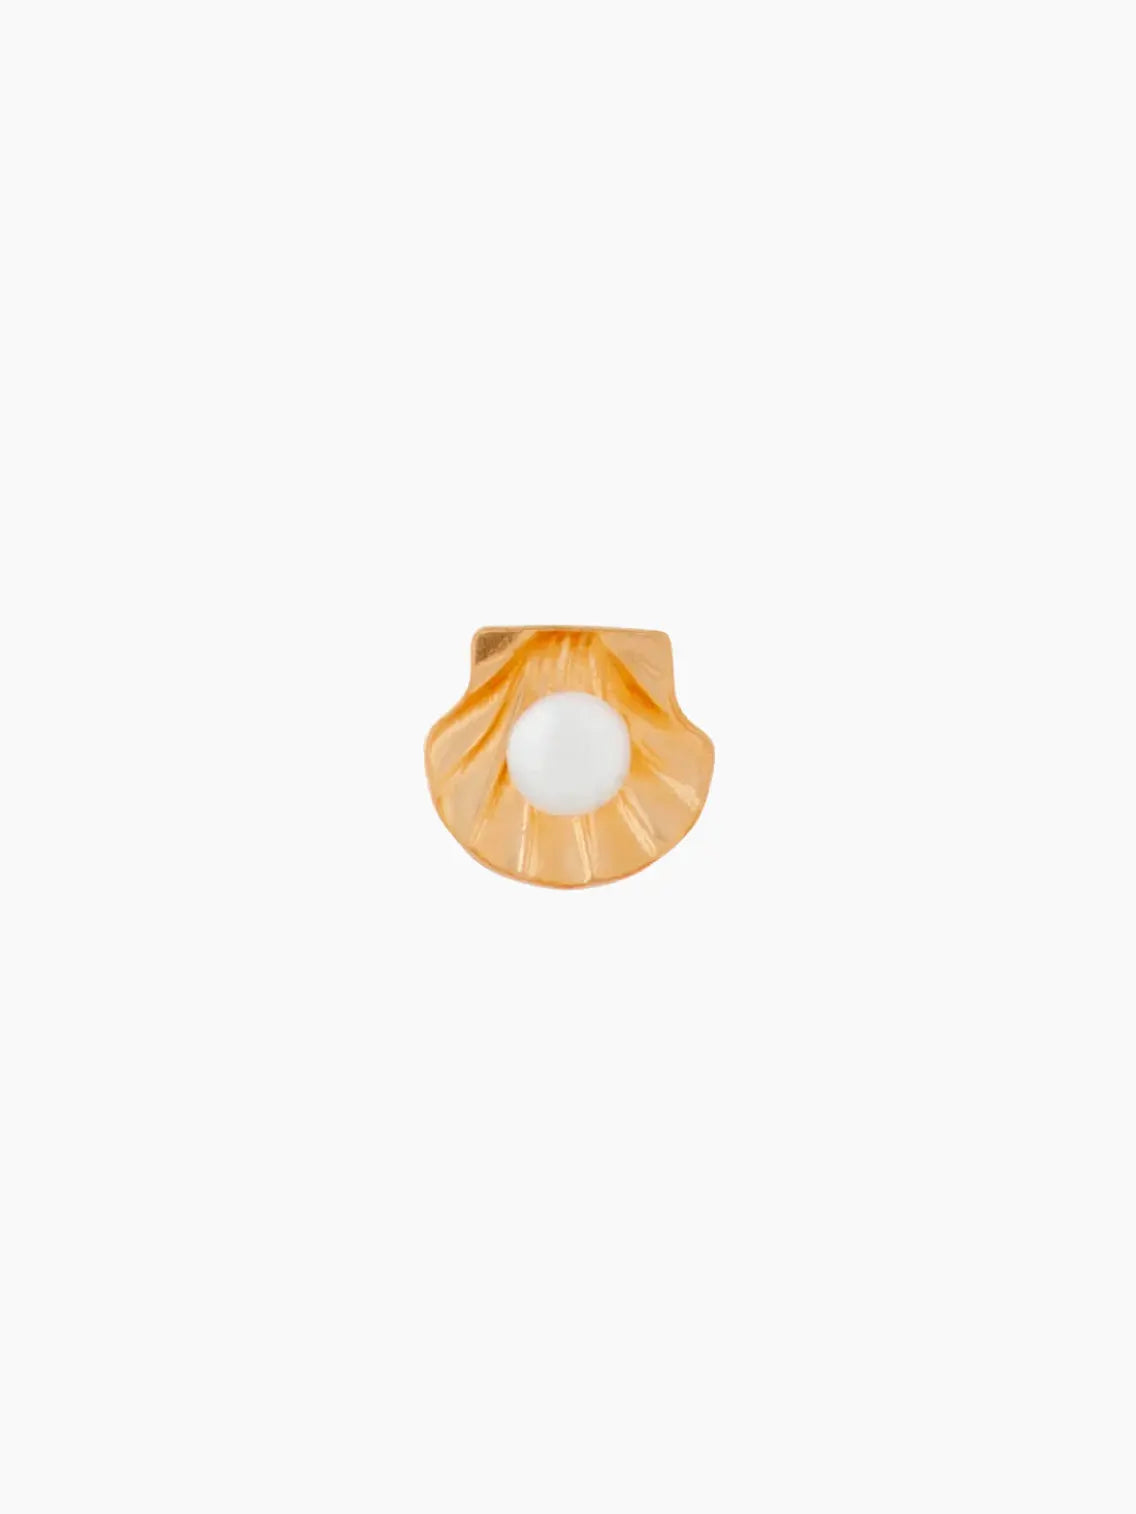 An amber-colored Under the Sea Stud Earring by Wilhelmina Garcia with a white central hole is set against a plain white background. The shell, reminiscent of treasures found in a charming Barcelona store, has a slightly curved shape with radial lines extending from the base to the edge.